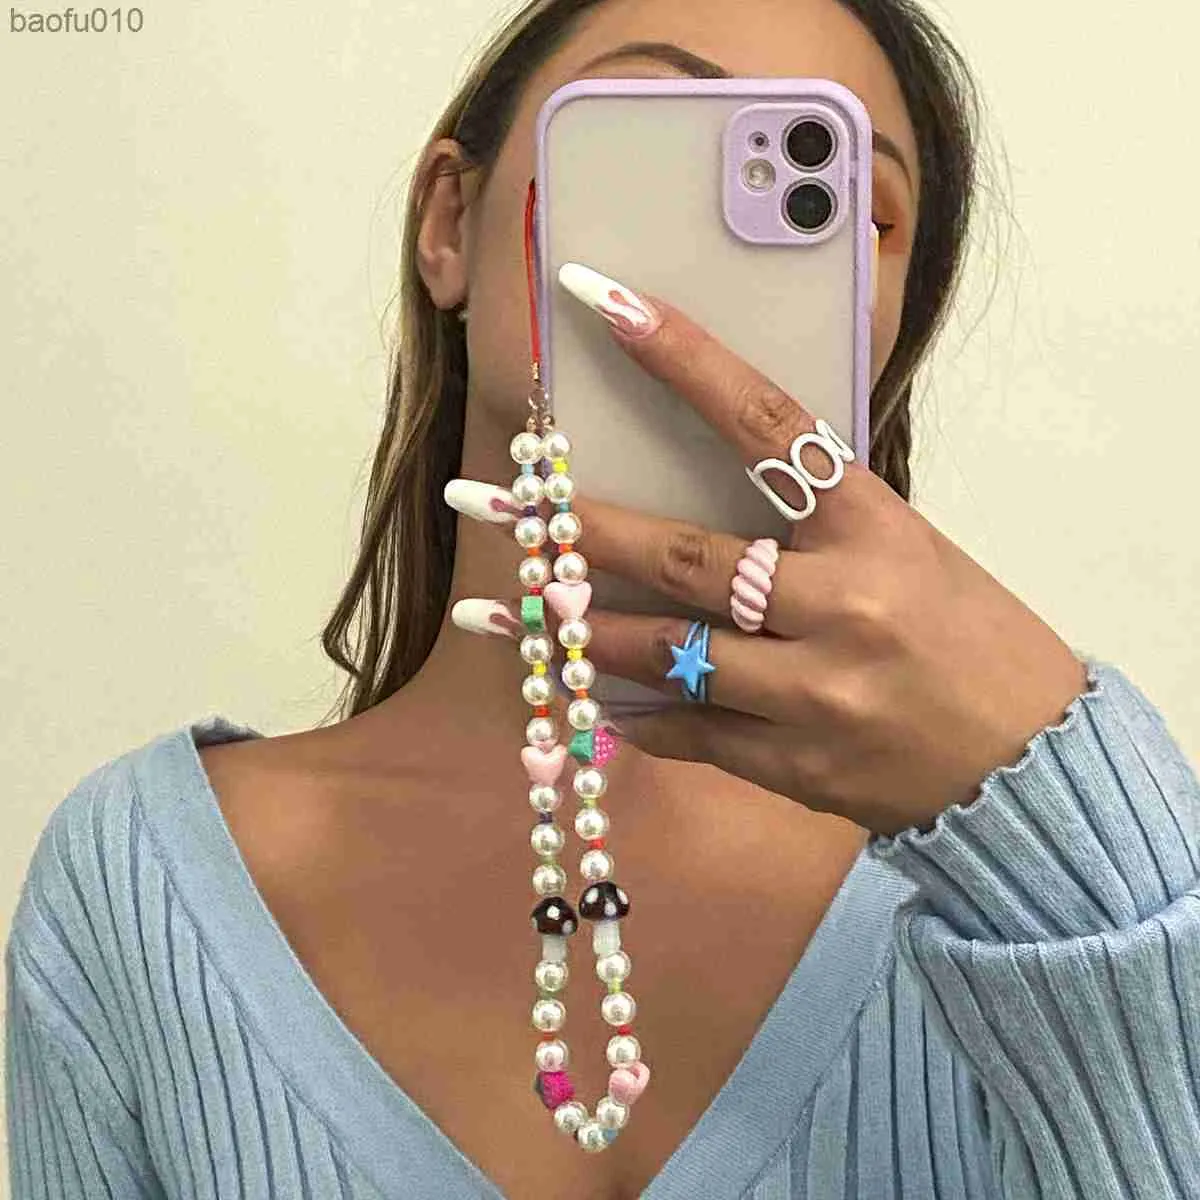 Unique Chain For Phone Mobile Straps Hand Made Charm Pearls Women Telephone Jewelry Beads Anti-Lost Lanyard Phone Accessories L230619